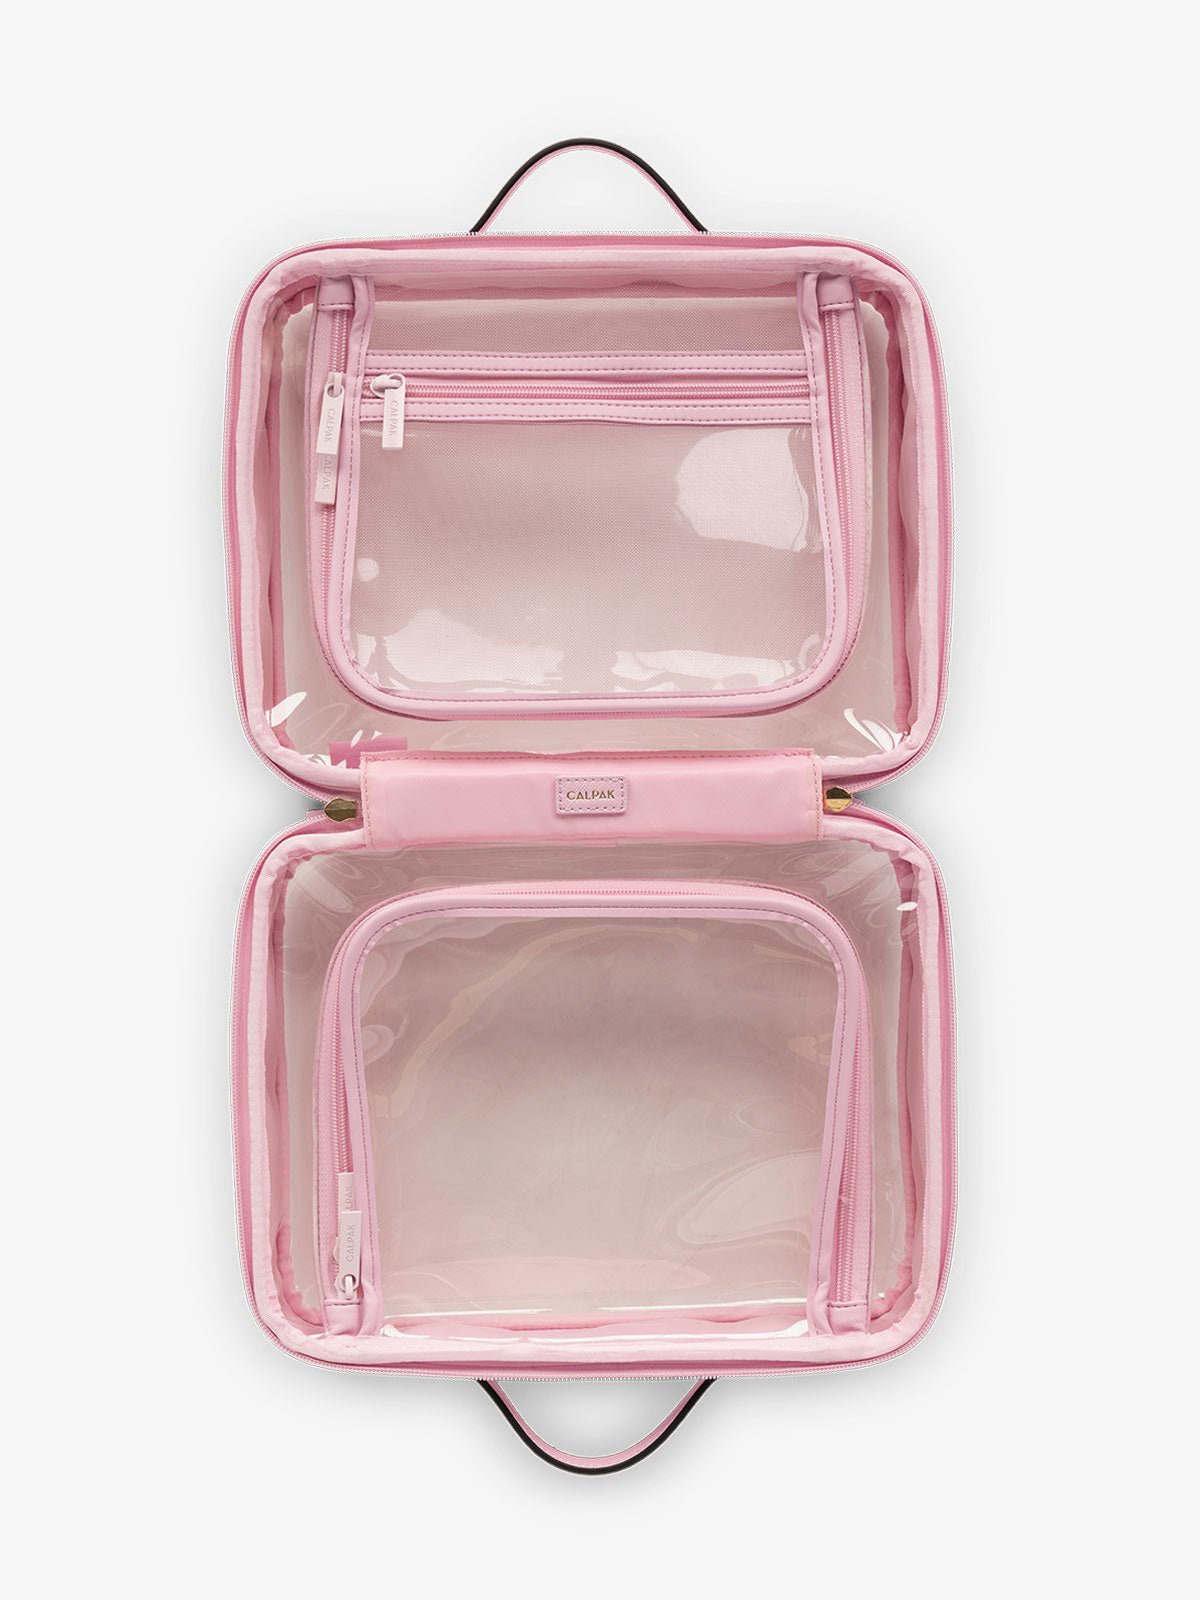 CALPAK large transparent water resistant travel makeup bag with compartments in pink